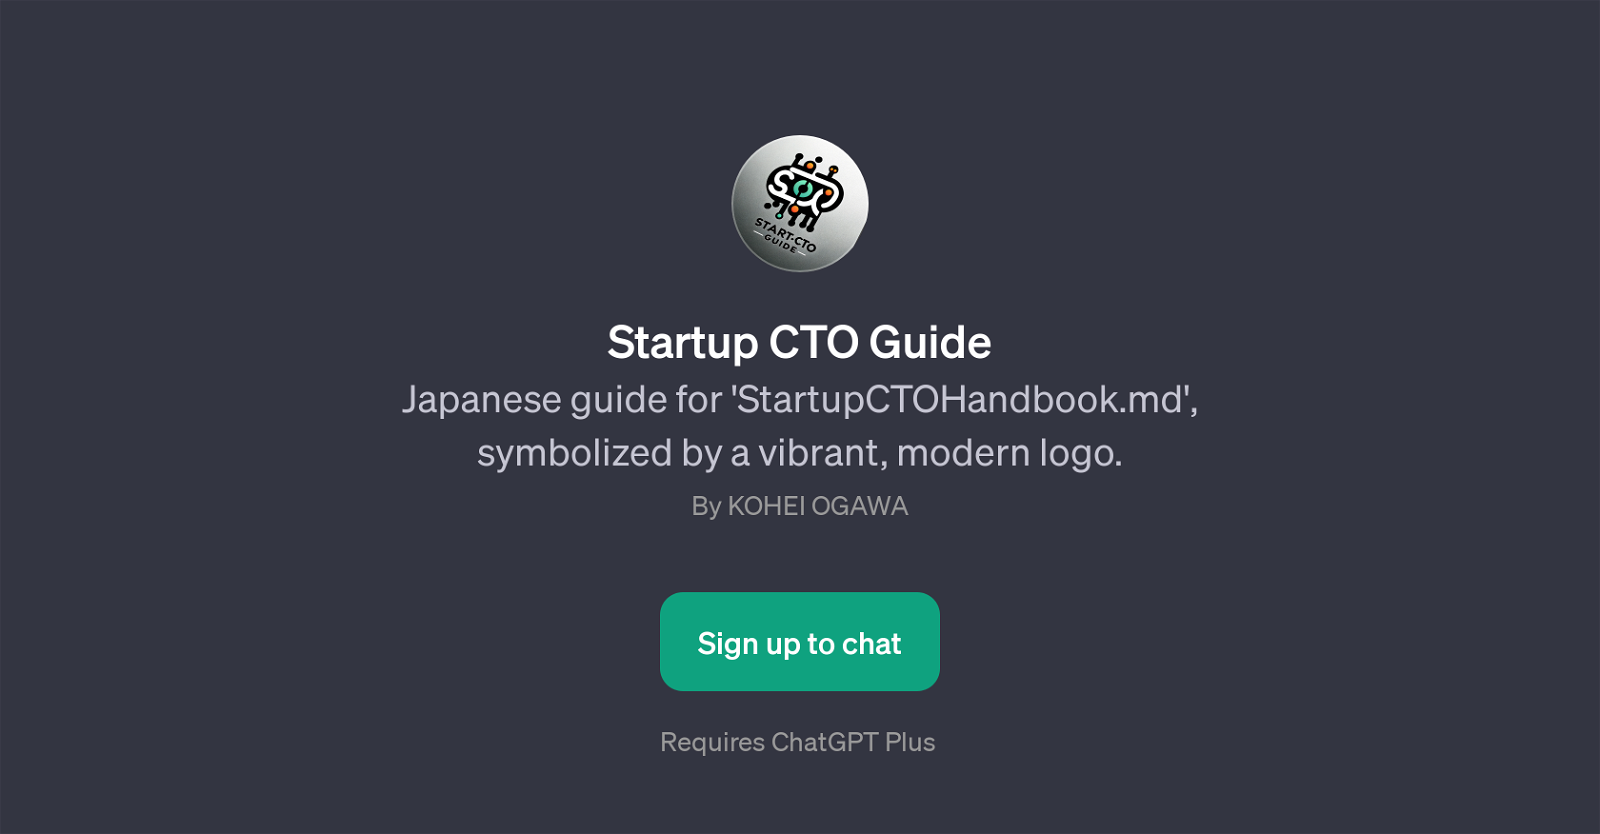 Startup CTO Guide website